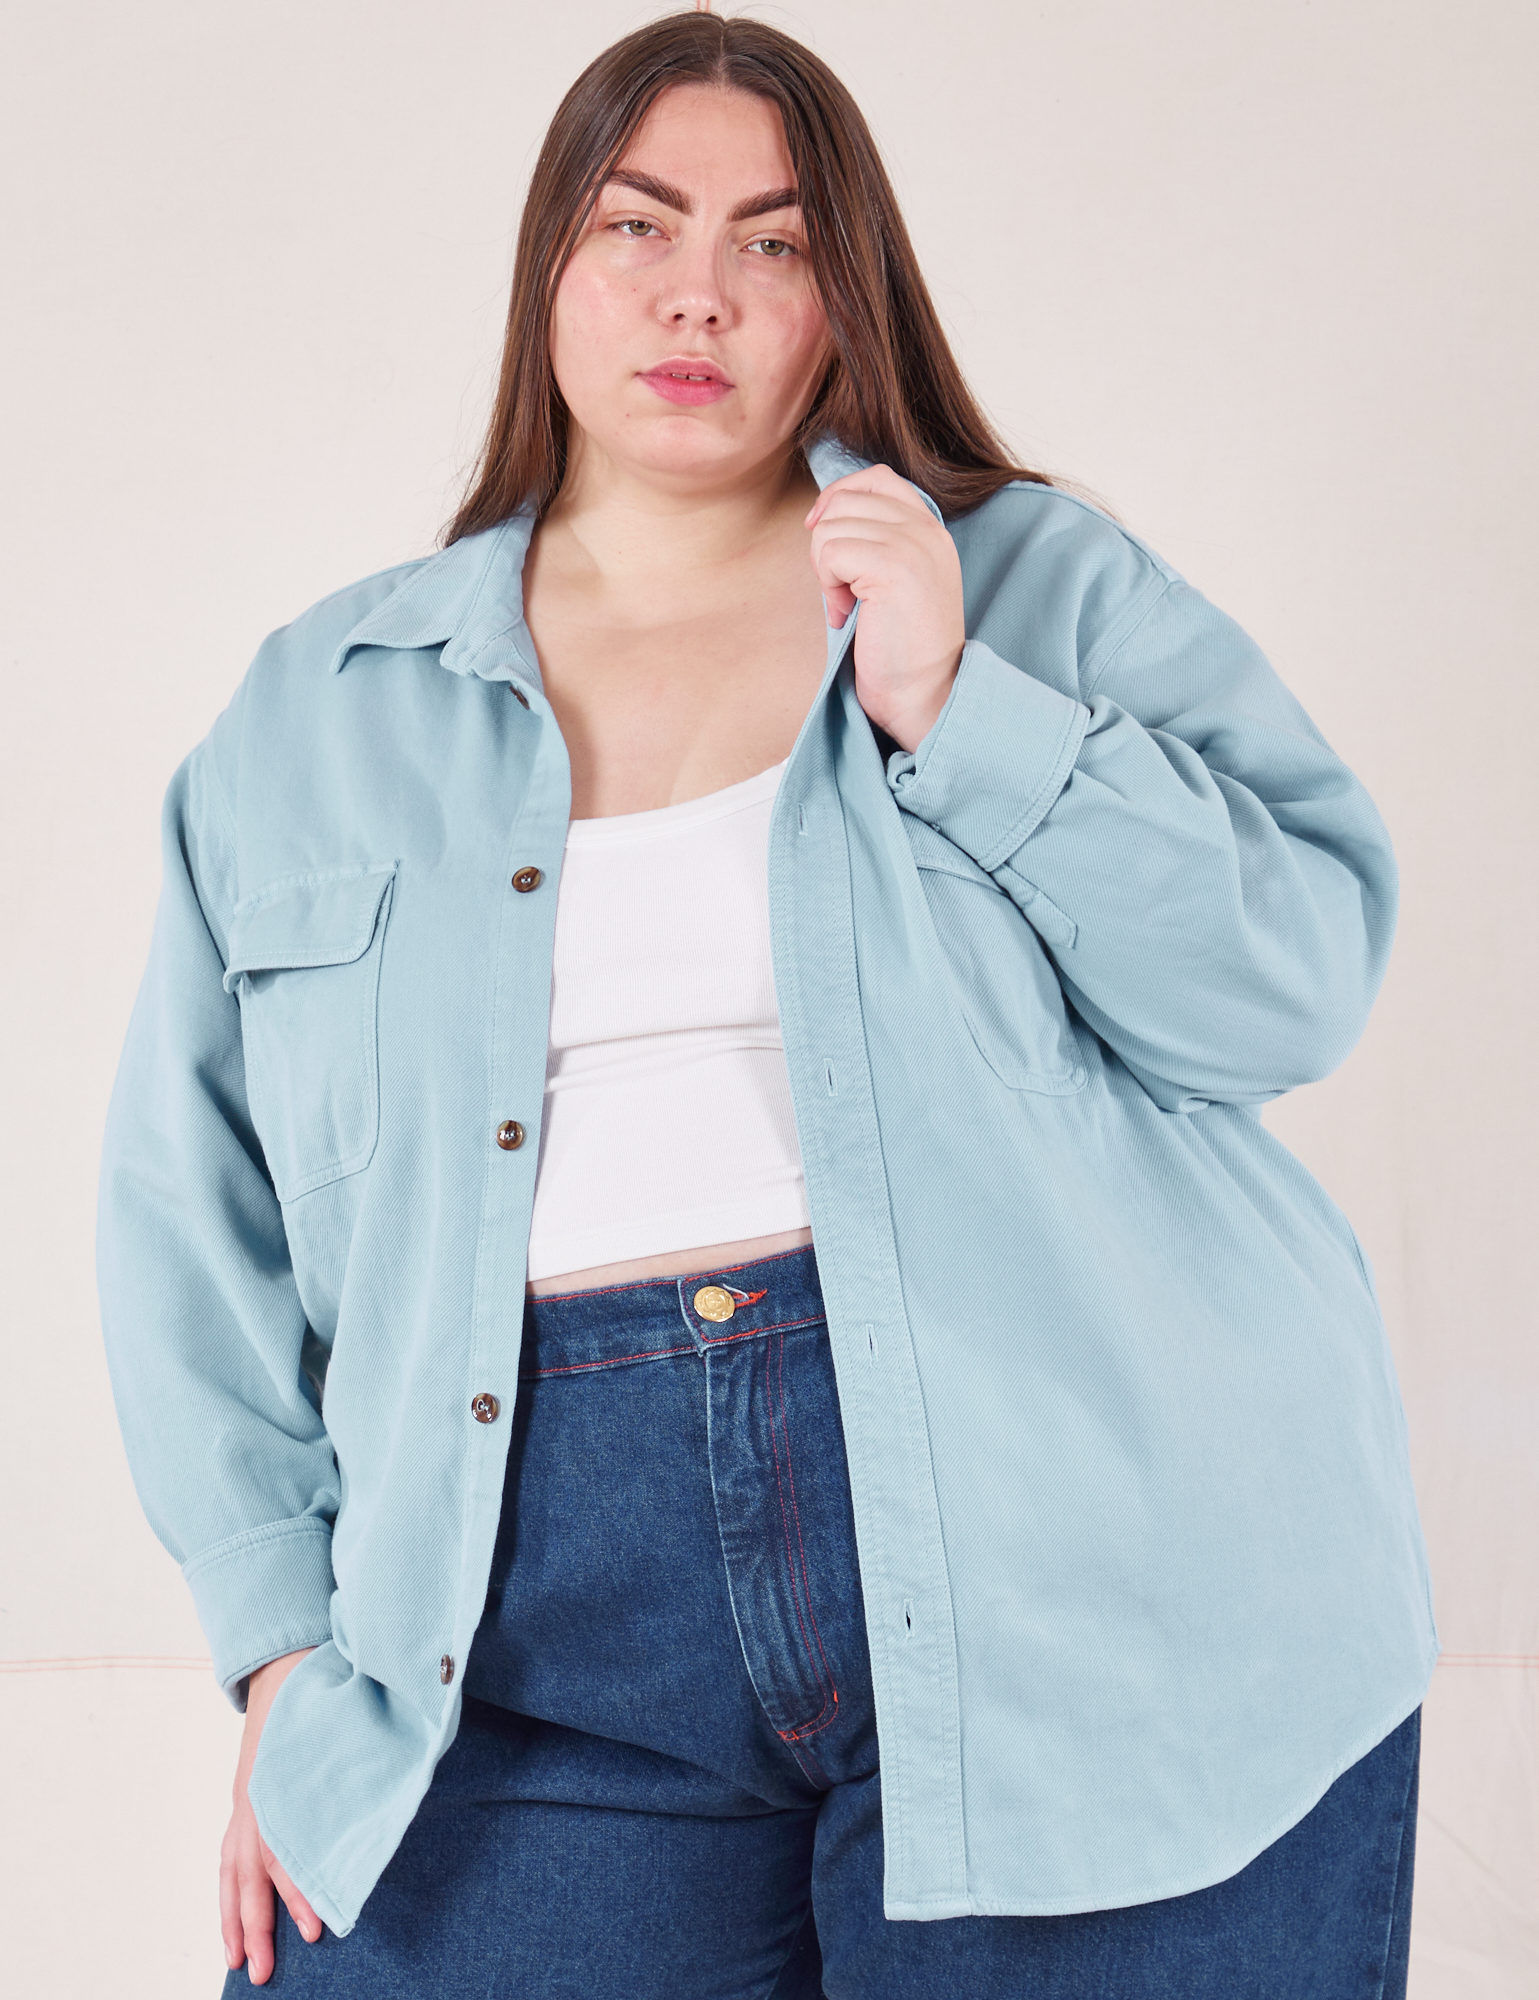 Marielena is wearing Flannel Overshirt in Baby Blue and dark wash Trouser Jeans